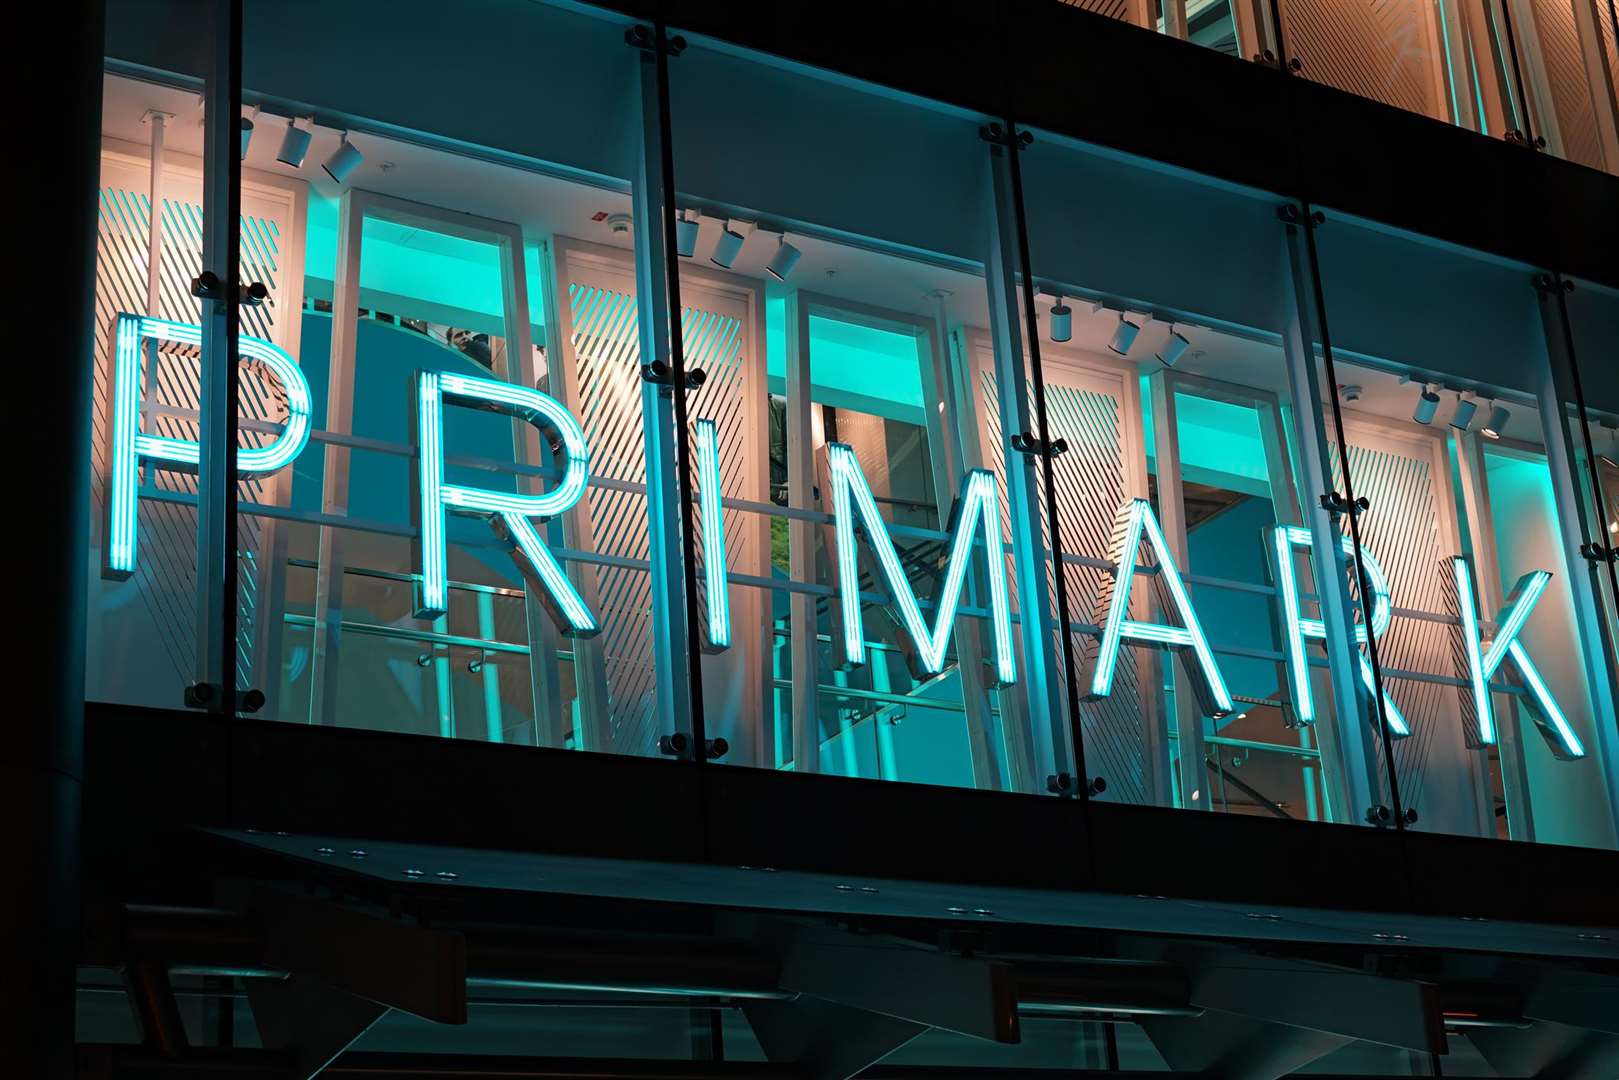 Primark will stay open later at Bluewater